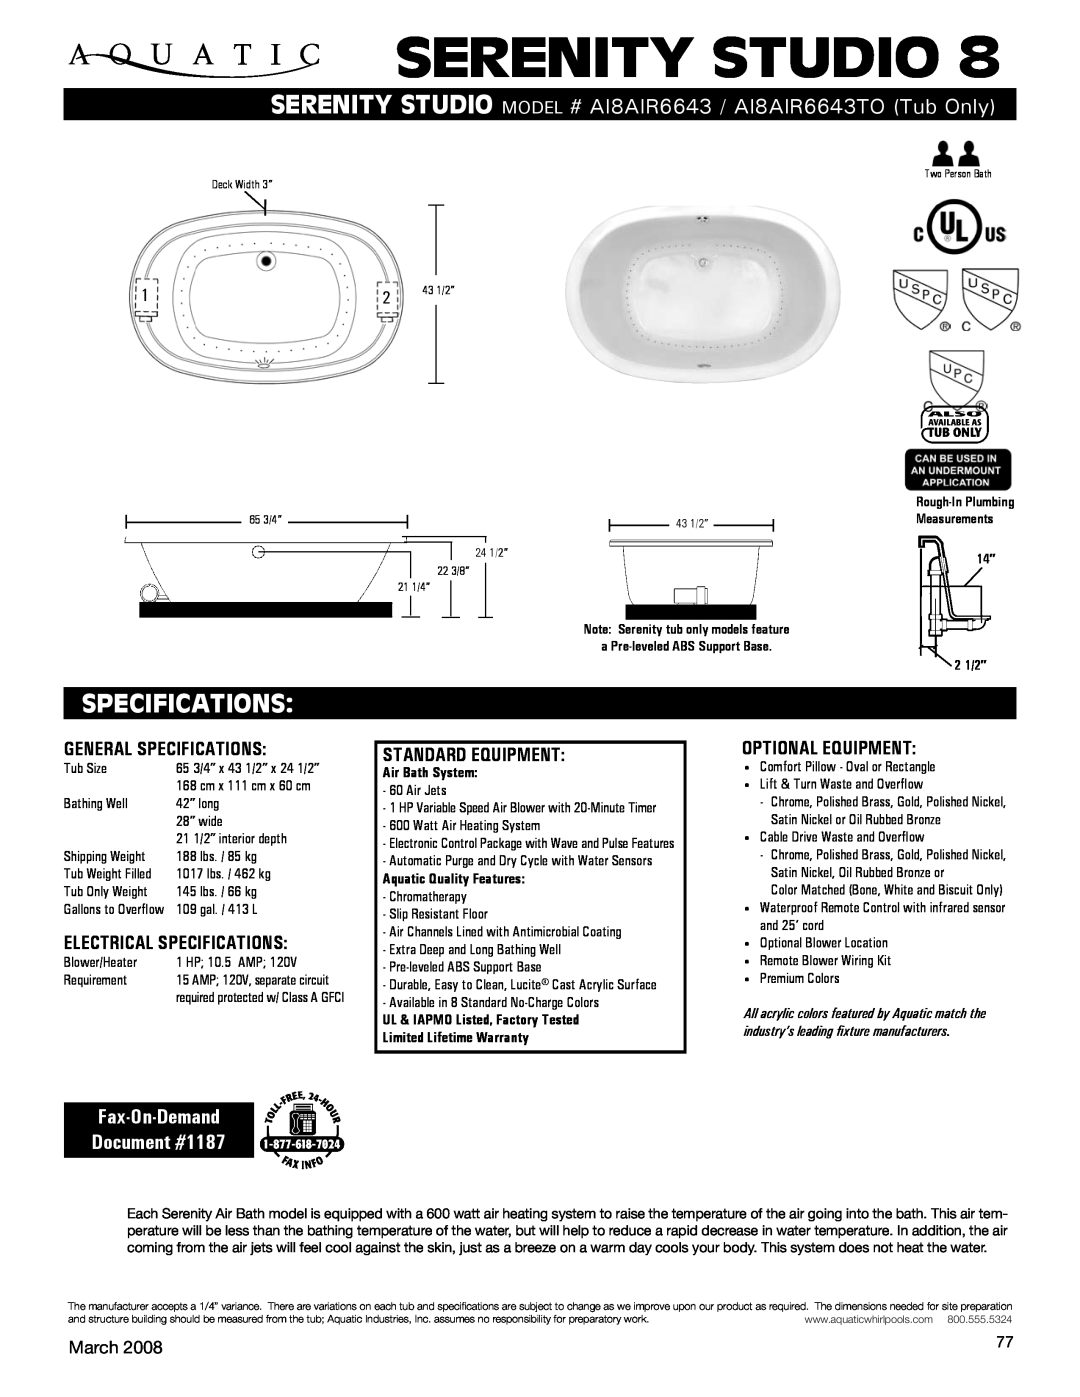 Aquatic AI8AIR6643 specifications Serenity studio, Fax-On-Demand Document #1187, General Specifications, March, 2 1/2” 